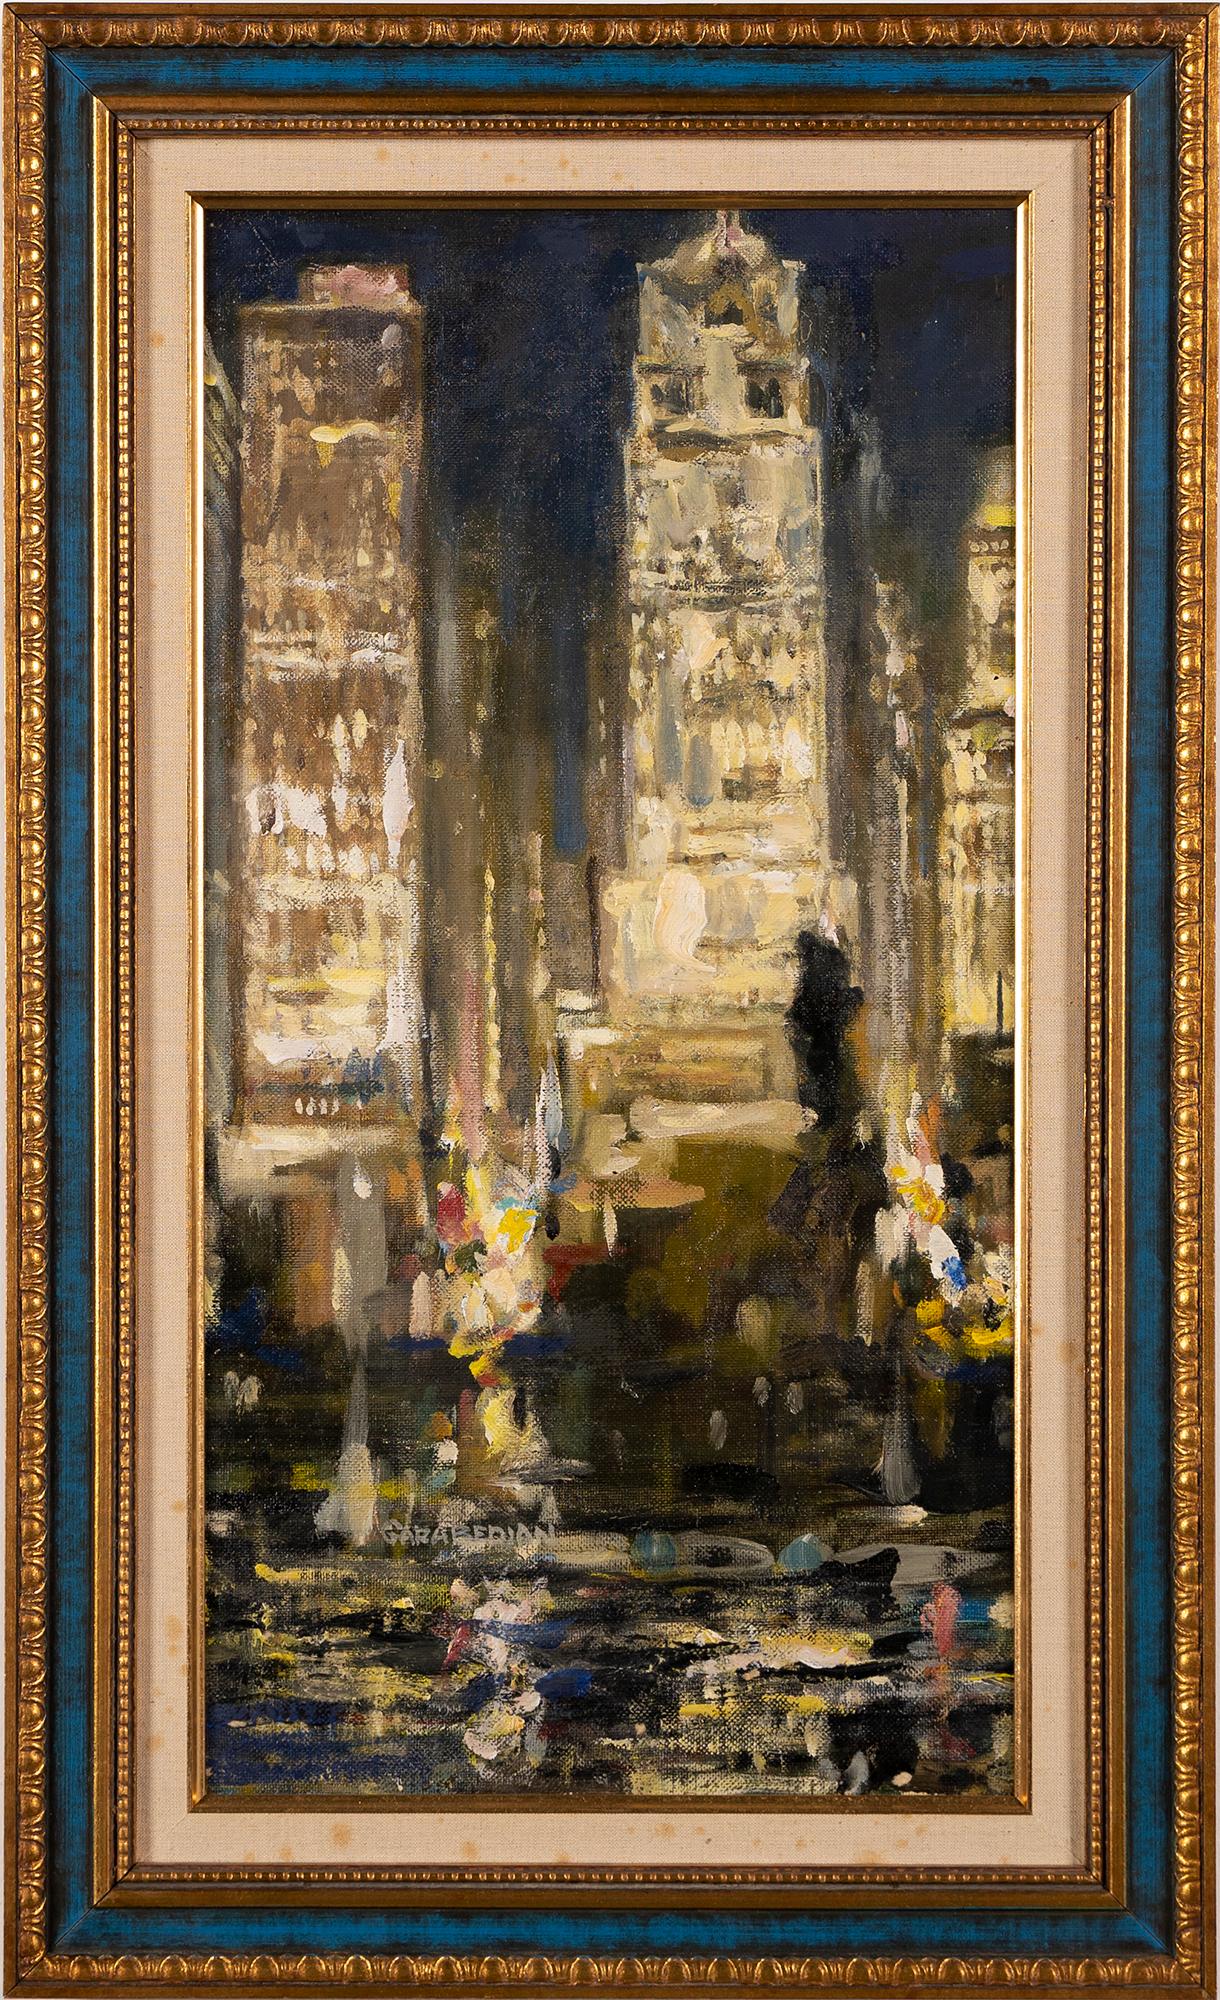 Antique American Modernist New York City Nocturnal Ashcan School Oil Painting